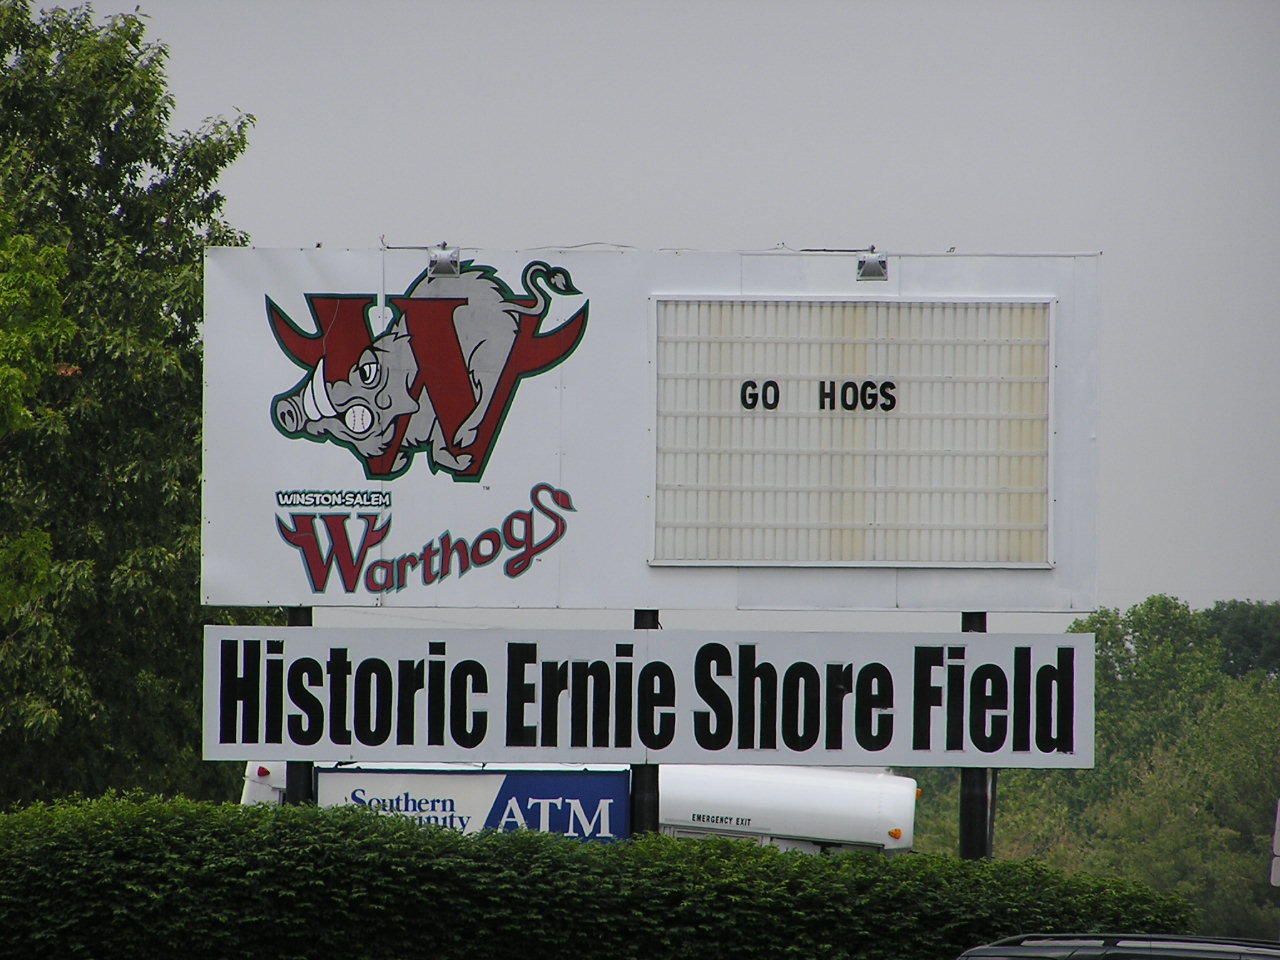 The sign outside Ernie Shore Field